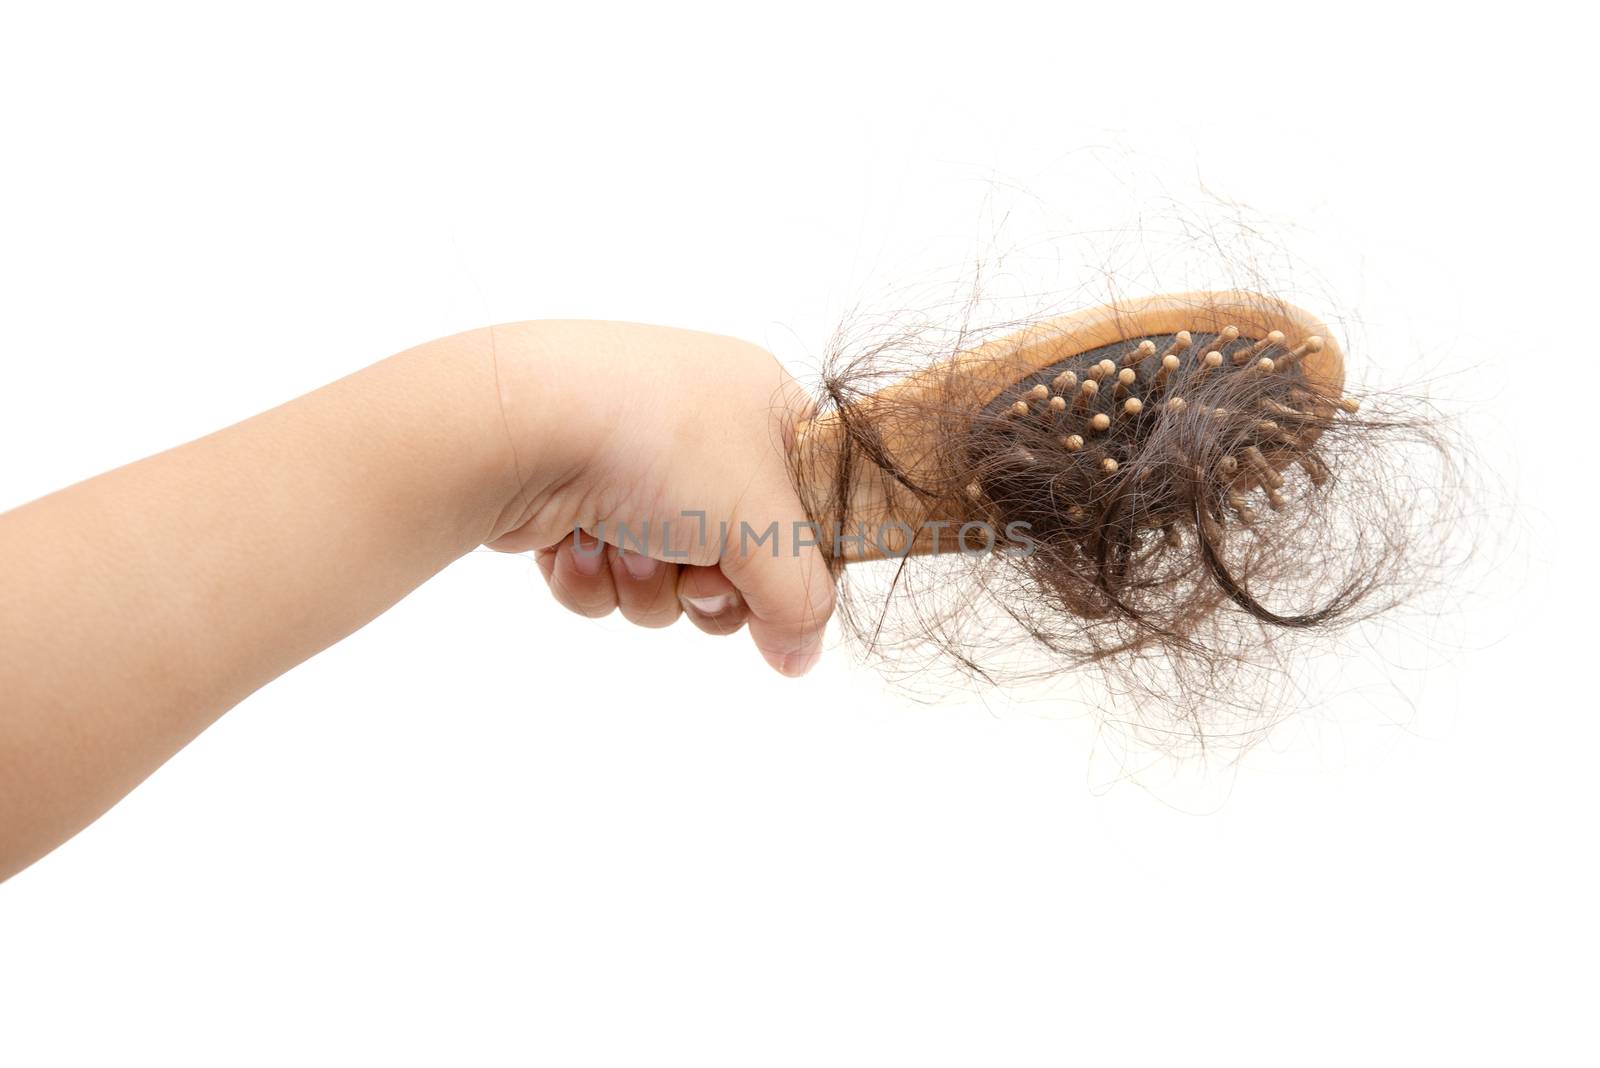 Children hand holding comb with lost hair on it, isolated on white background.